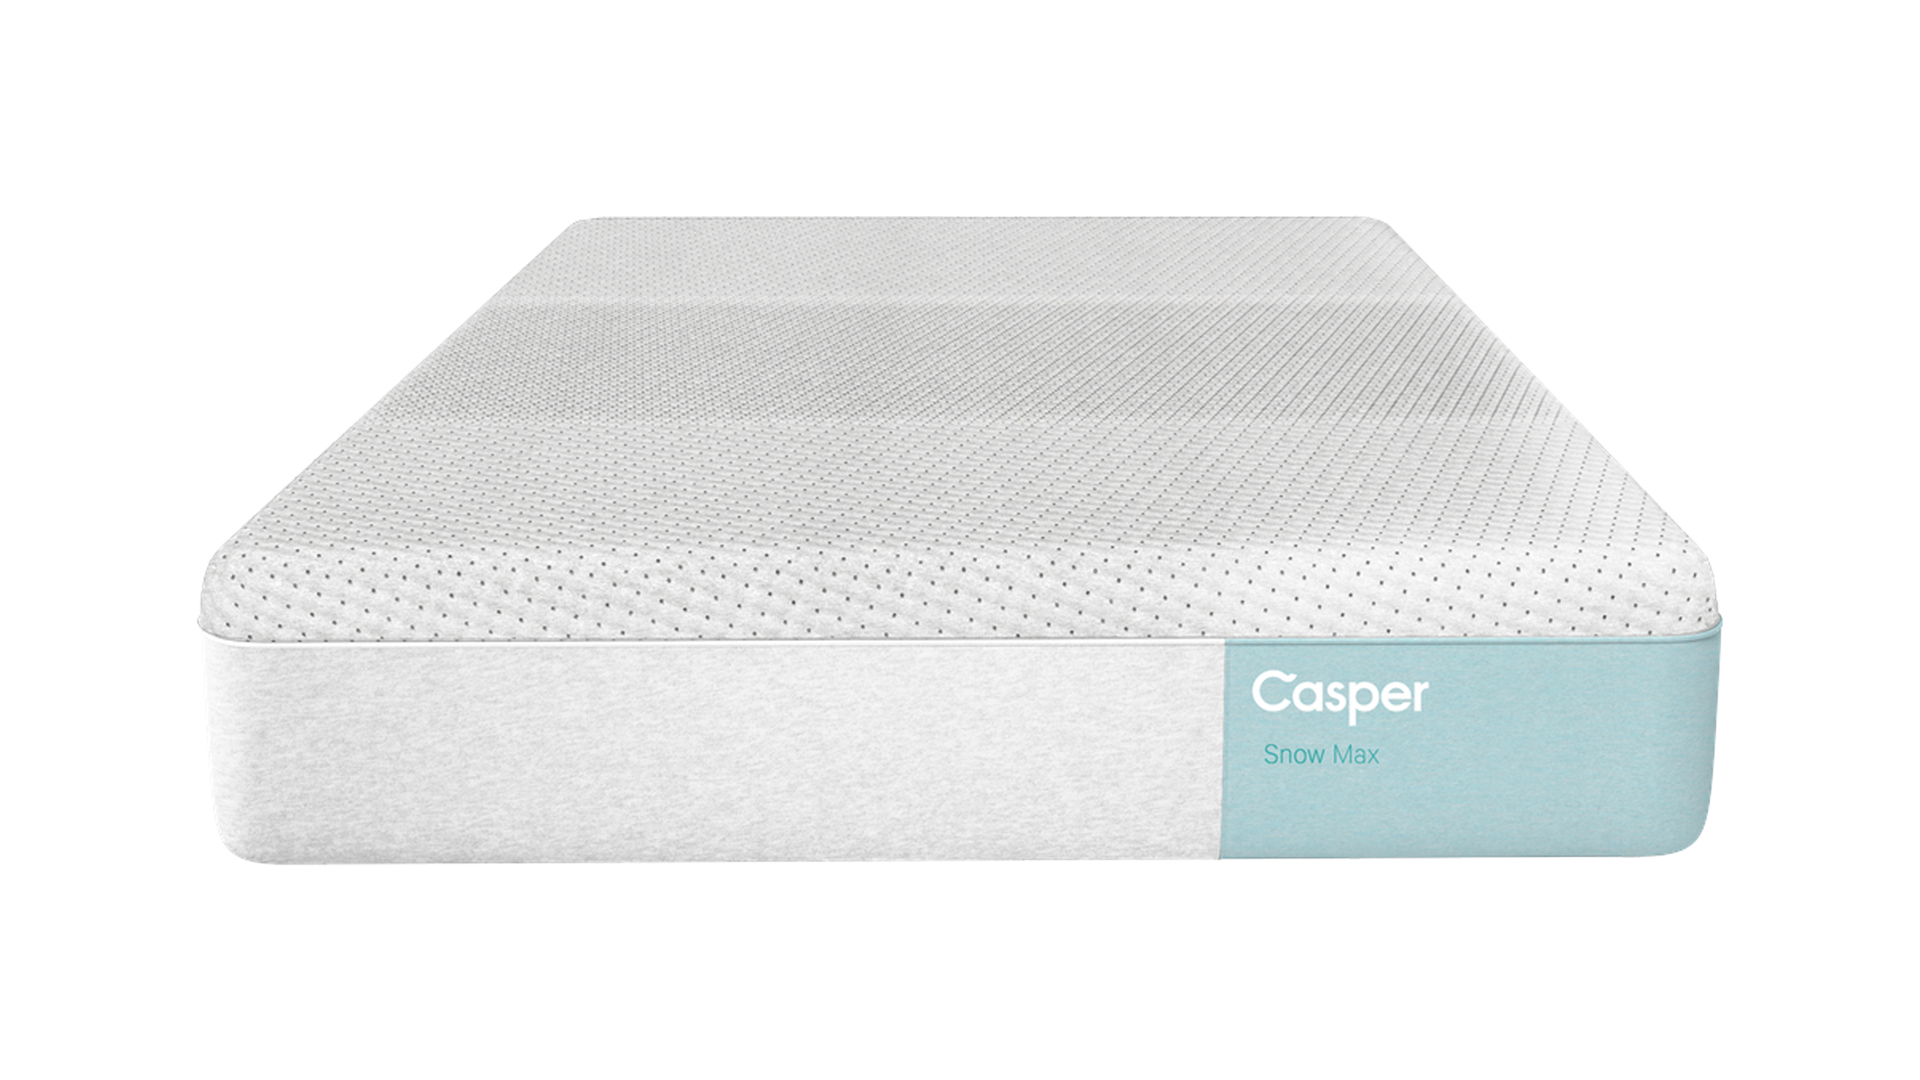 Casper Snow Max Hybrid mattress product image with white background